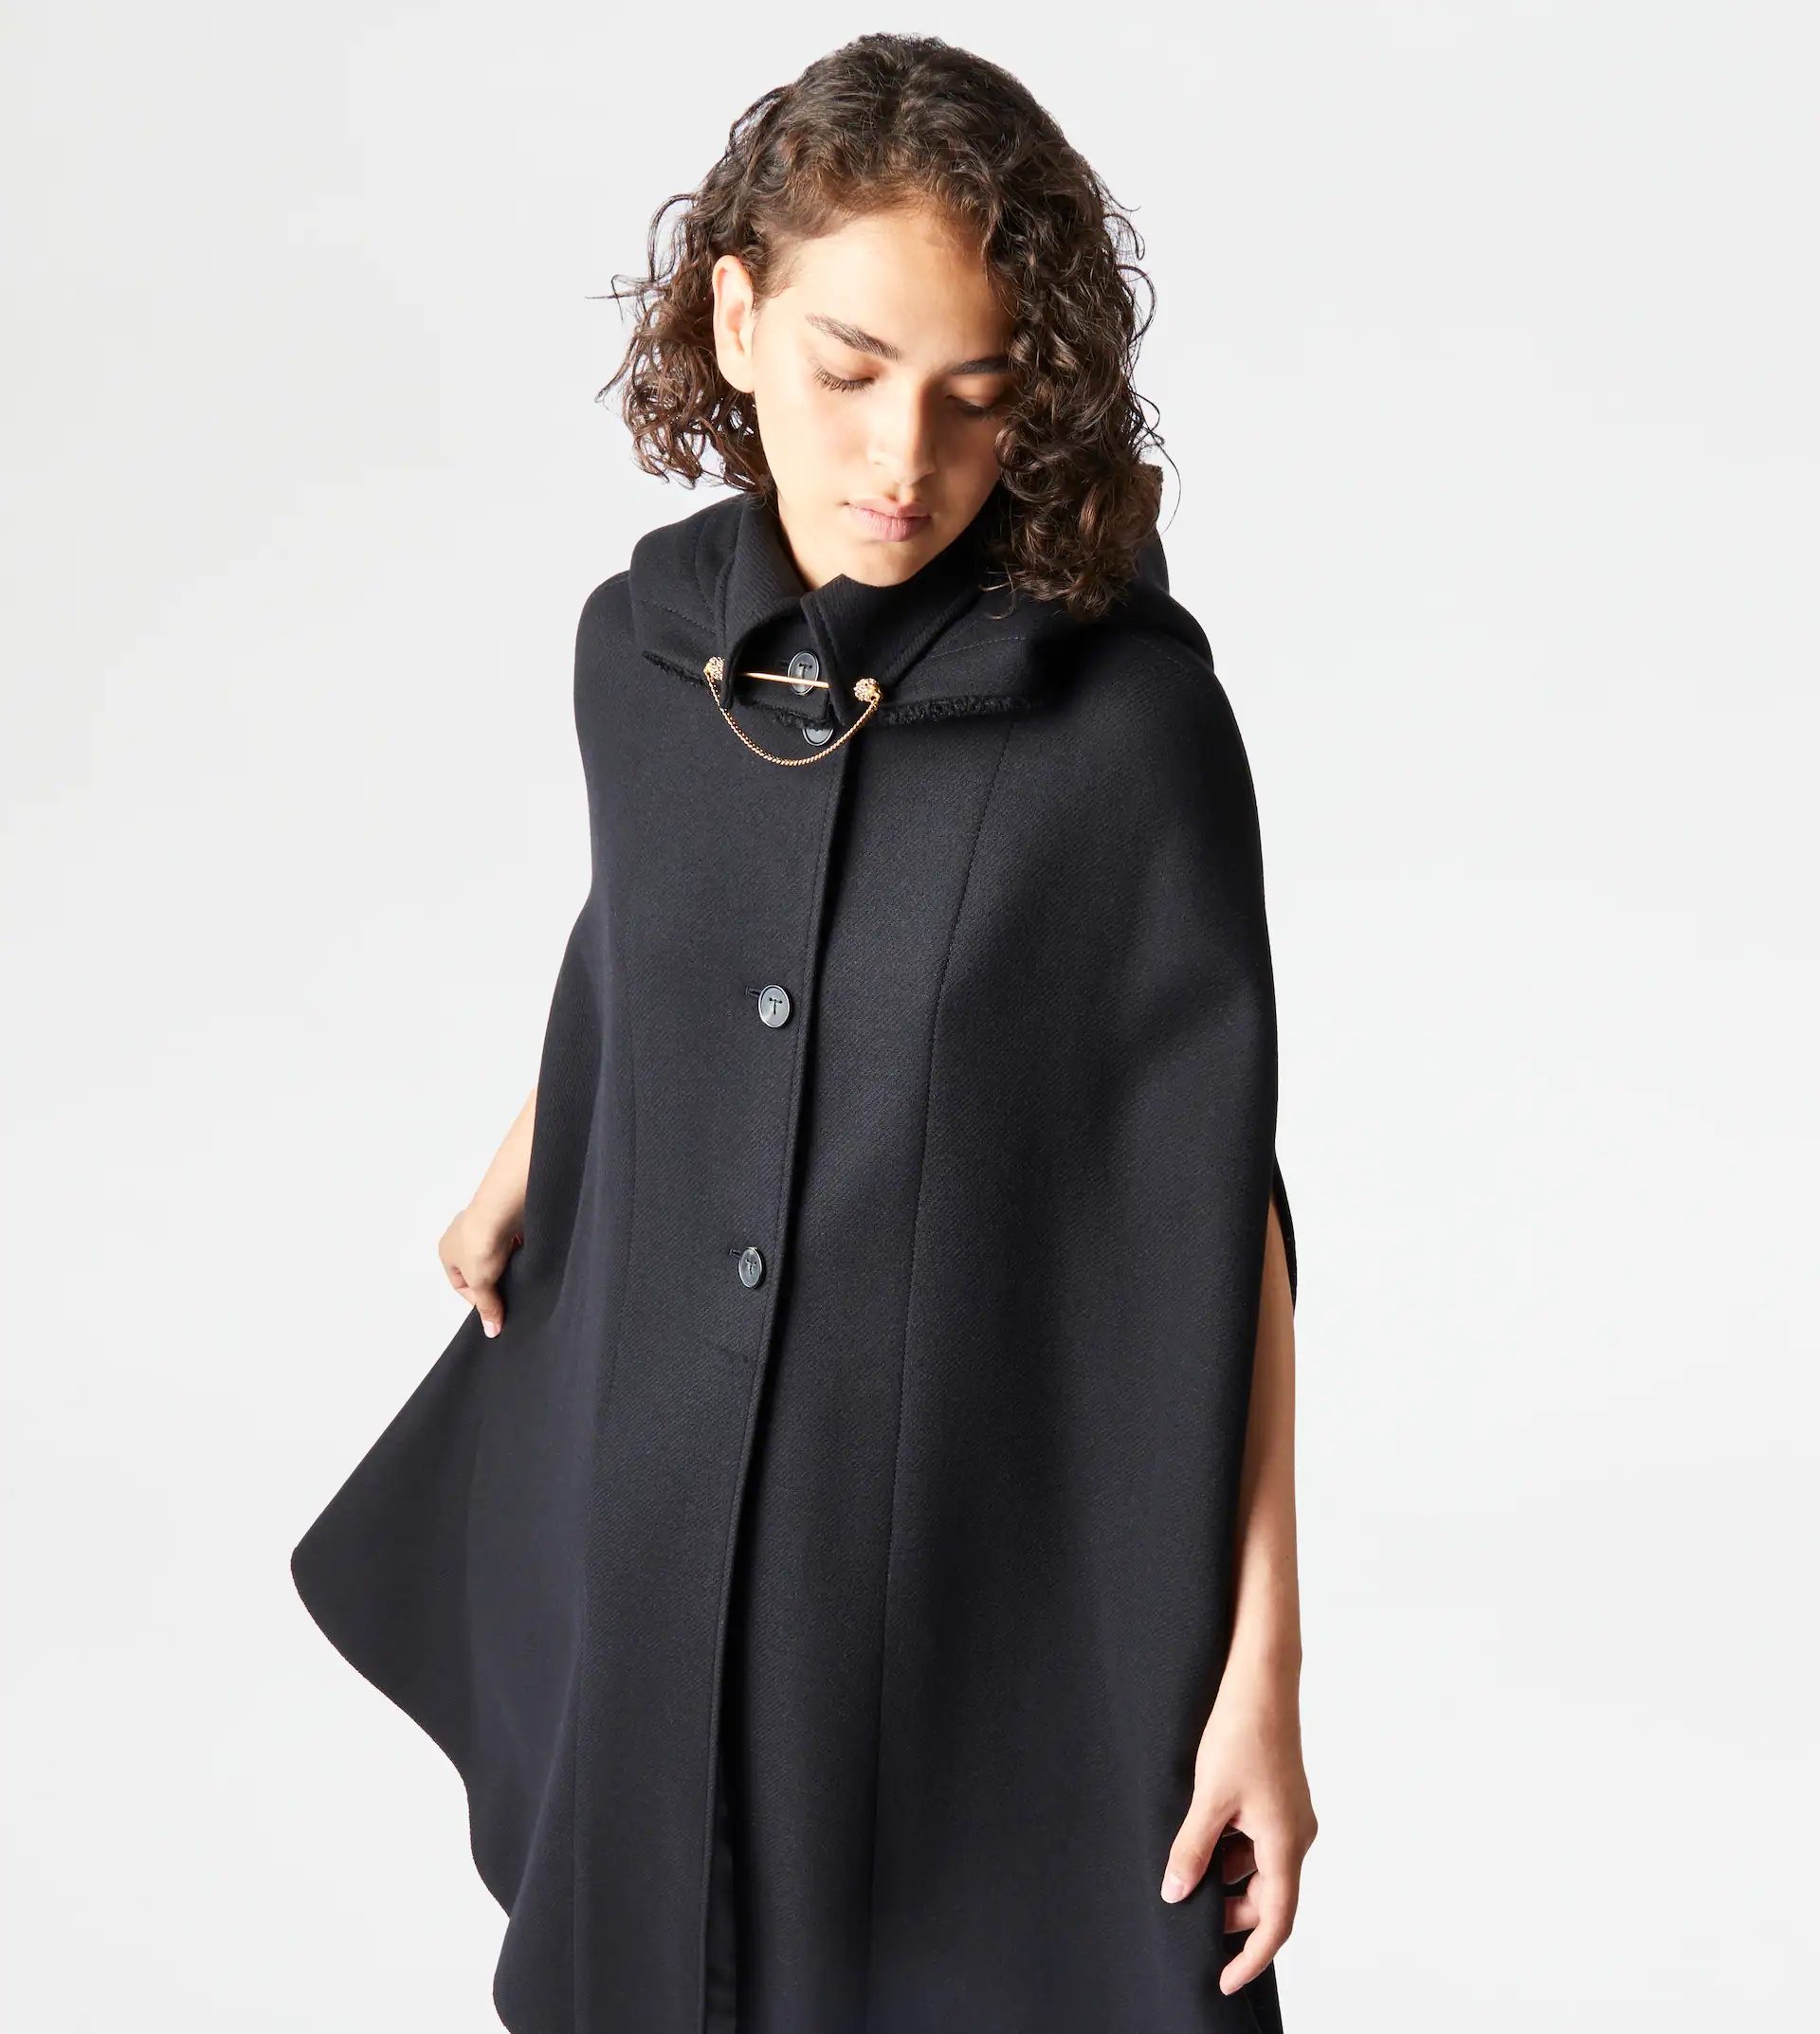 CAPE WITH BROOCH - BLACK - 7